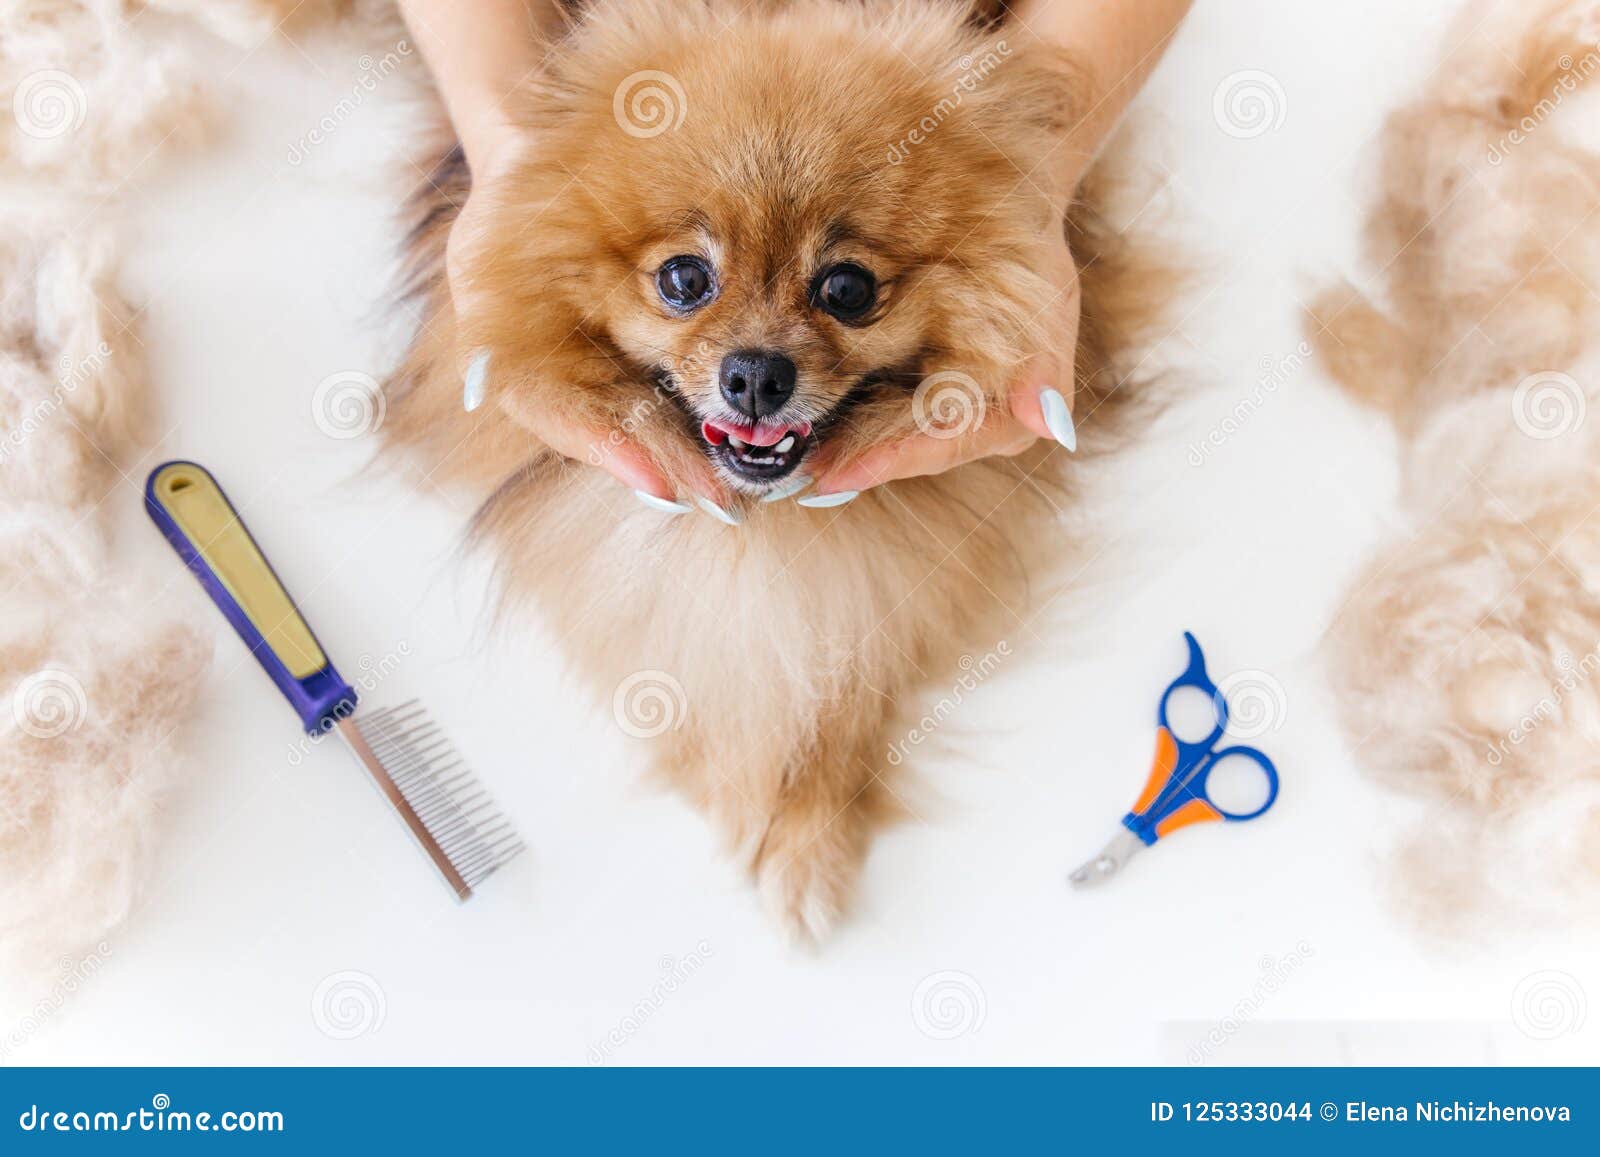 A Portrait Of A Professional Dog Hairdresser Grooming A Dog Stock